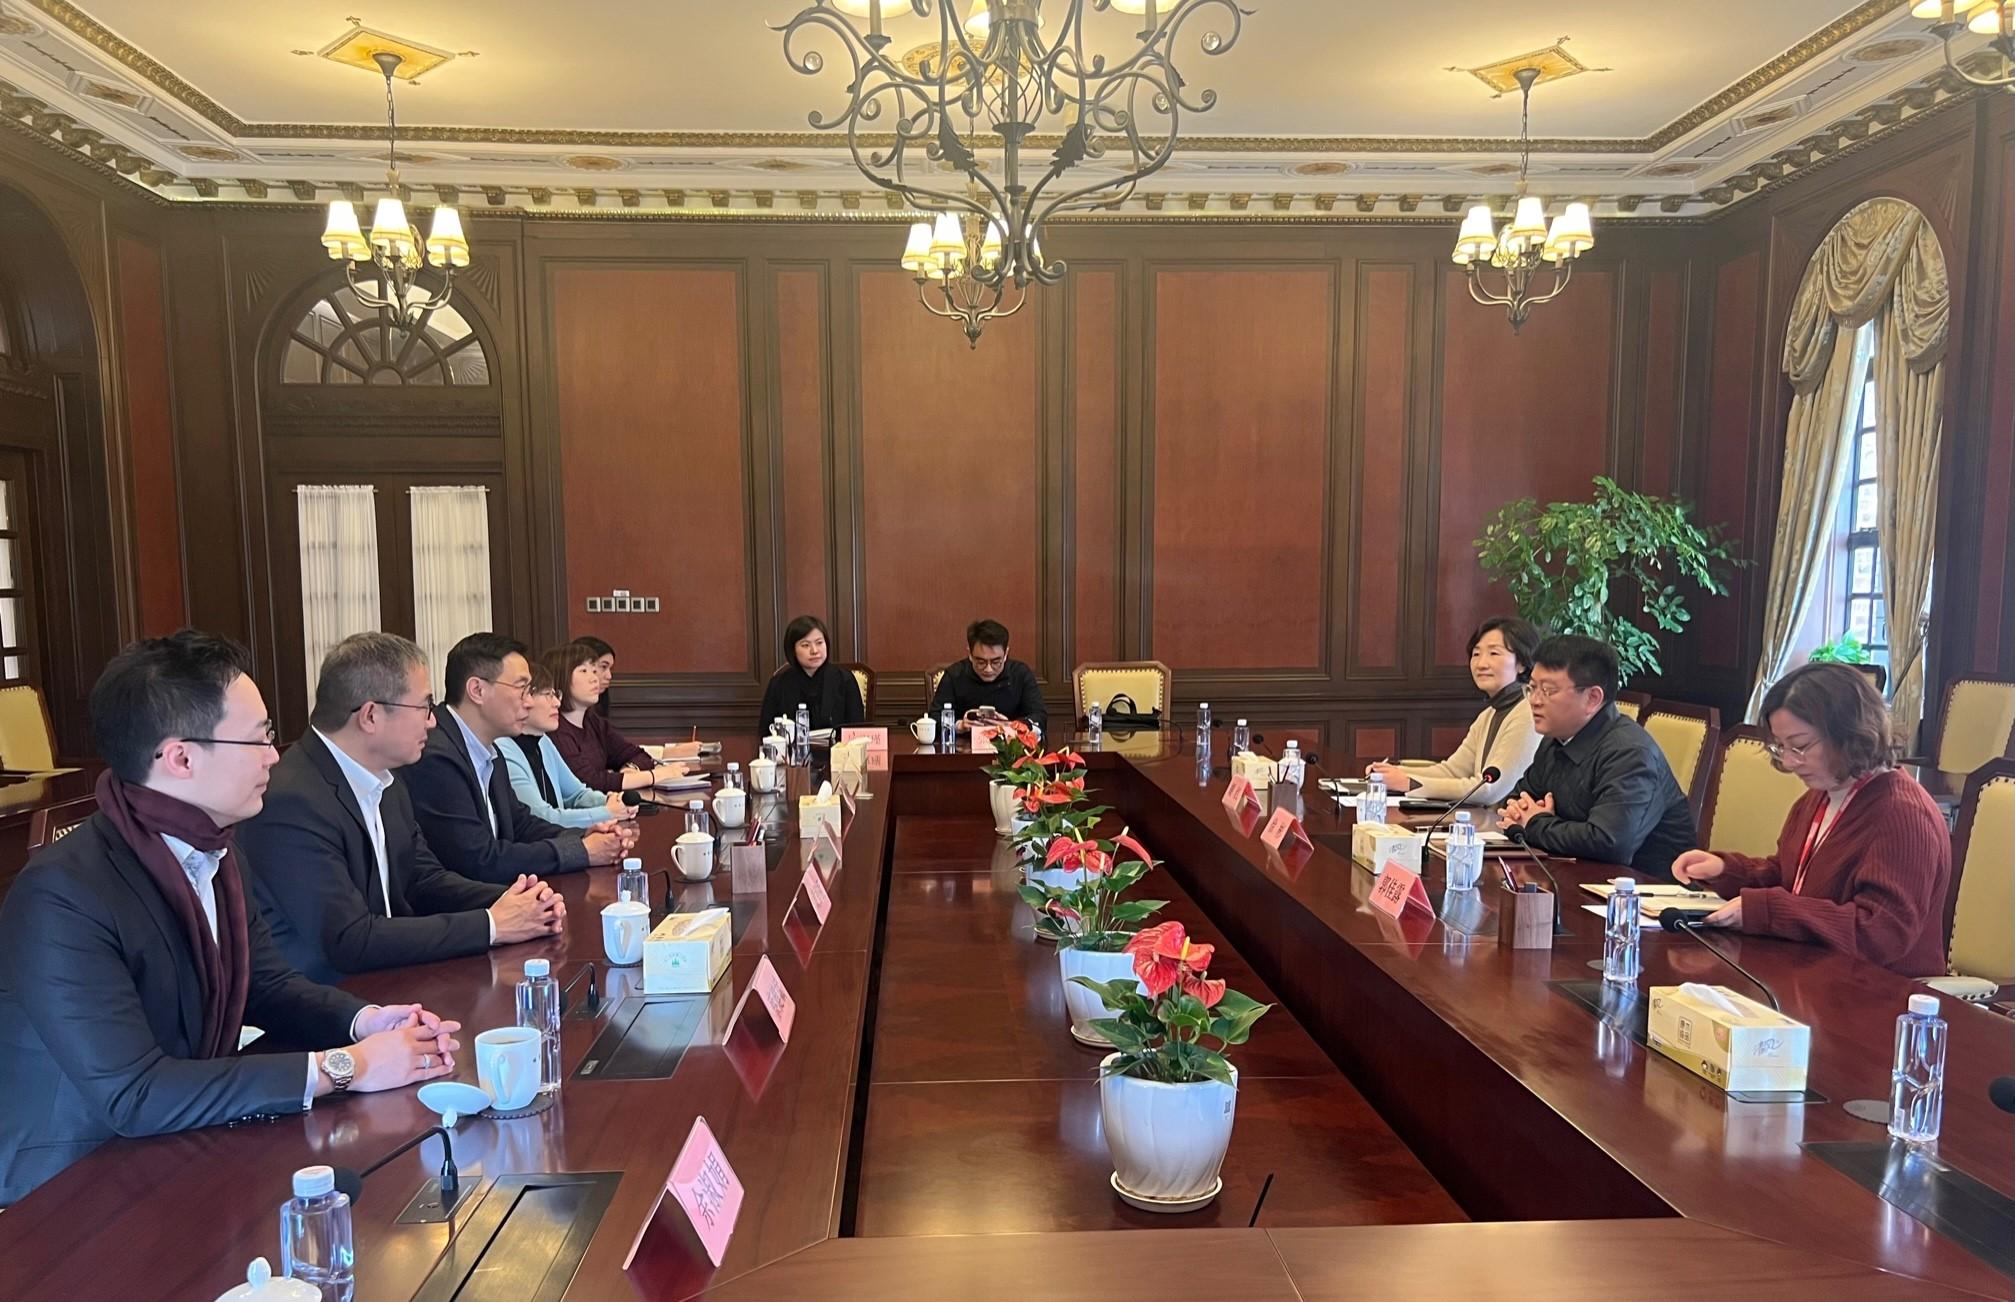 The Secretary for Culture, Sports and Tourism, Mr Kevin Yeung (third left), met with the Director of the Shanghai Administration of Sports, Mr Xu Bin (second right), in Shanghai today (January 9). Mr Yeung introduced Hong Kong as a destination for major sports events, adding that athletes and citizens from Shanghai are welcome to join sports events in Hong Kong. The Permanent Secretary for Culture, Sports and Tourism, Mr Joe Wong (second left), was also present.